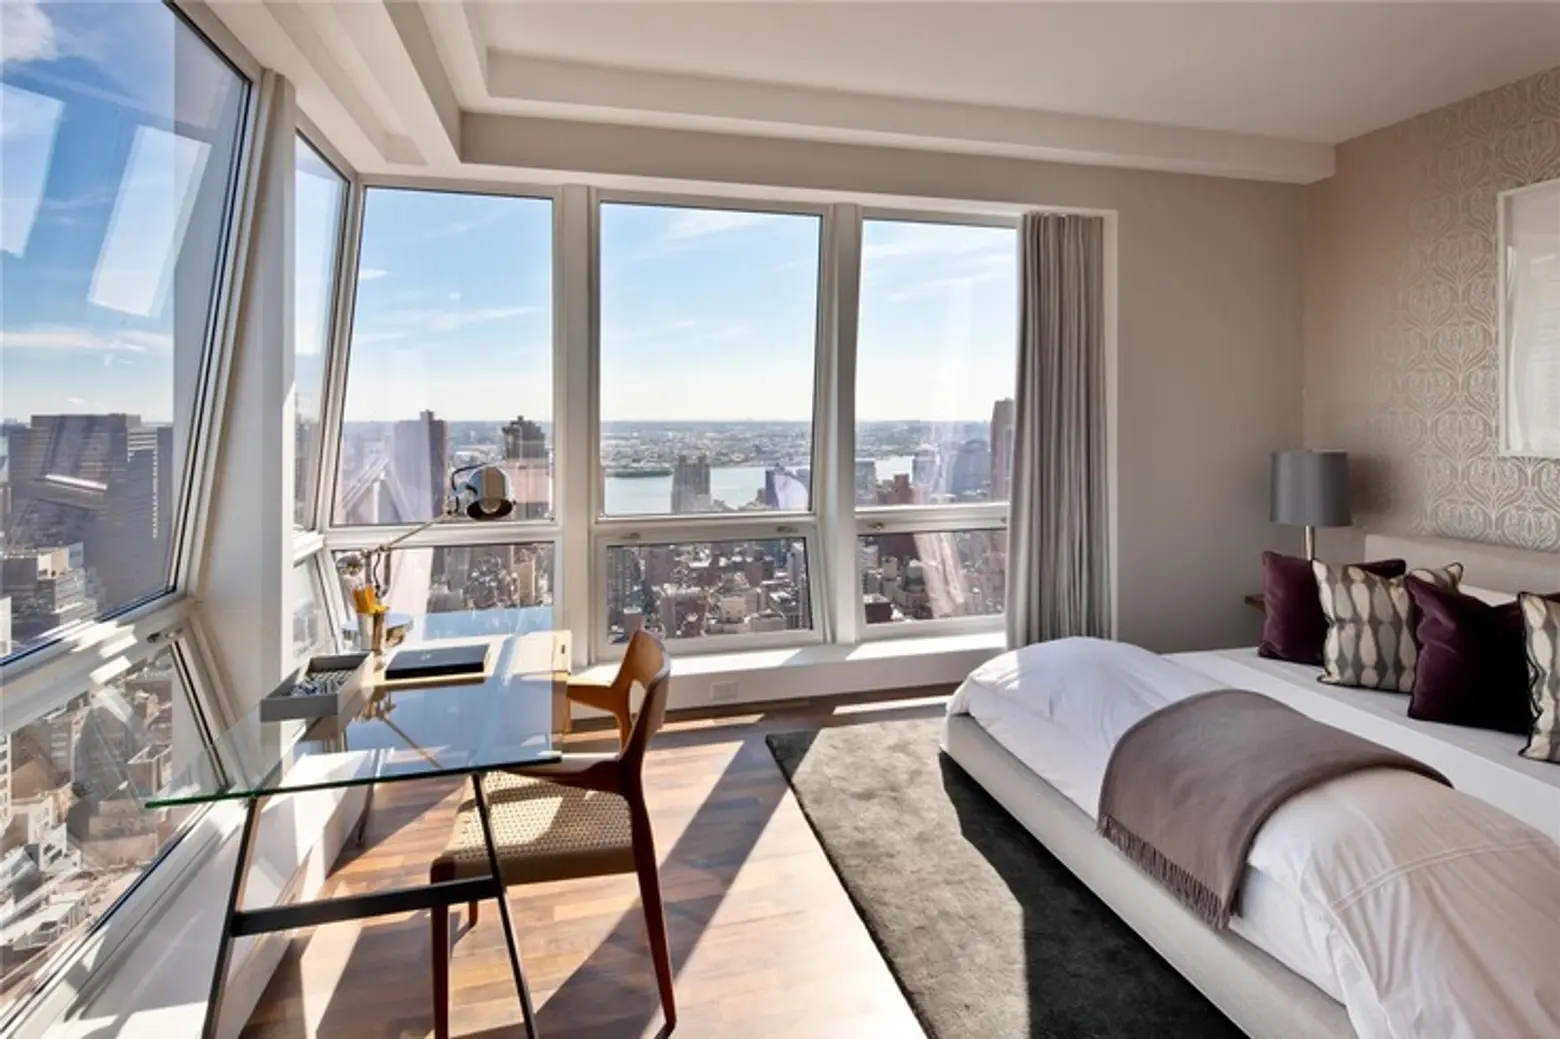 Wake Up to Stunning 180 Degree Views of the City That Never Sleeps